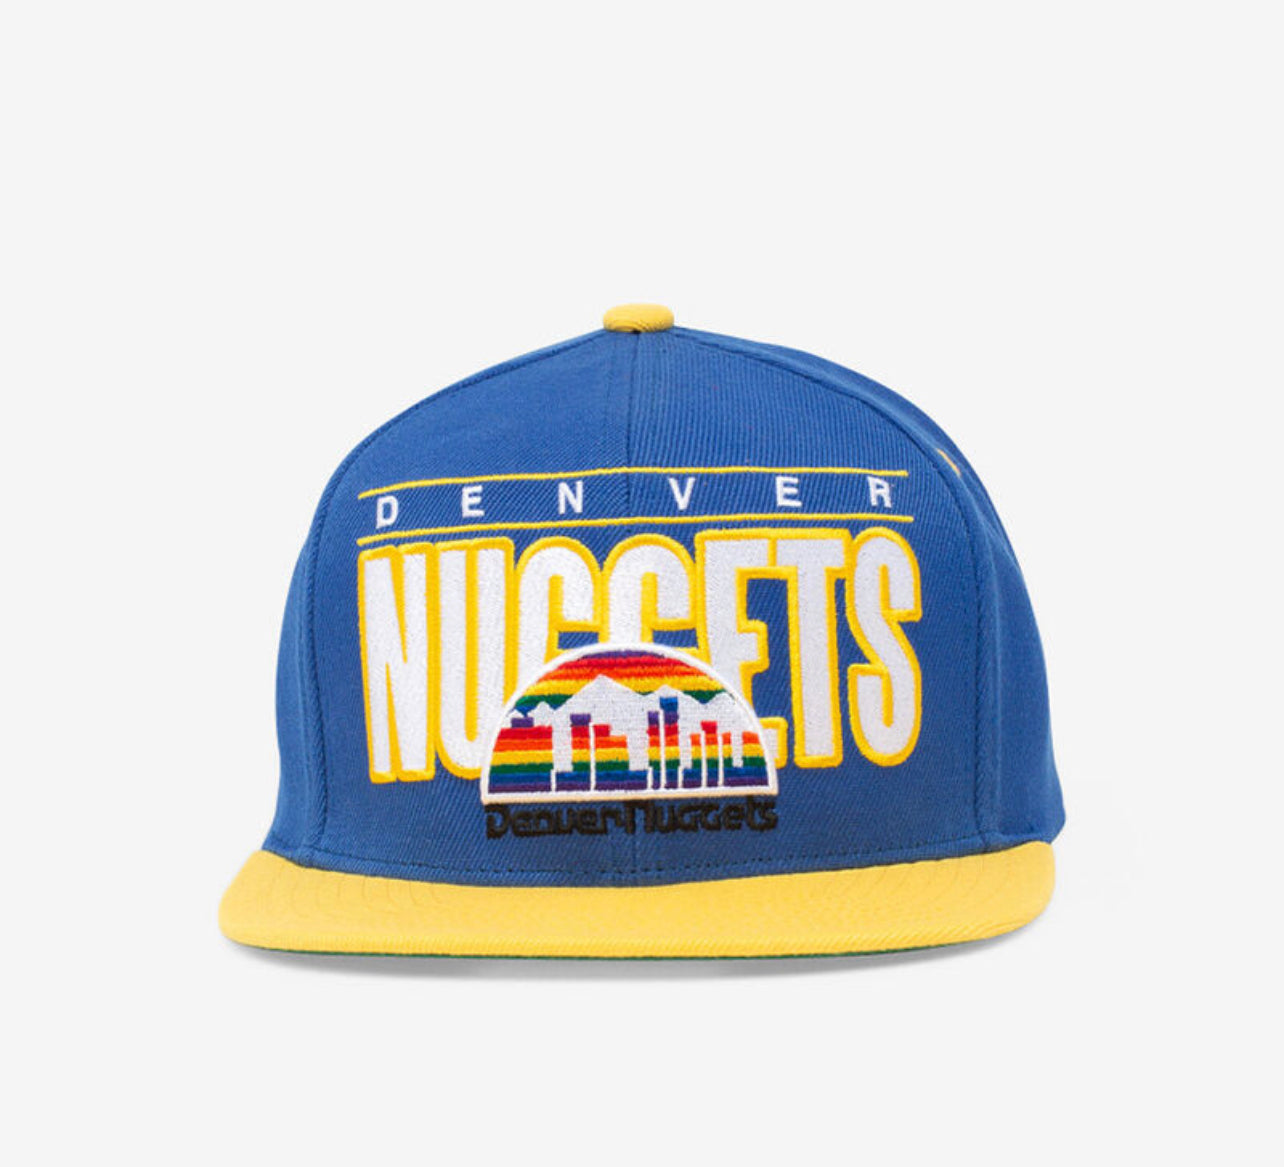 Mitchell & Ness Denver Nuggets SnapBack red hat Official